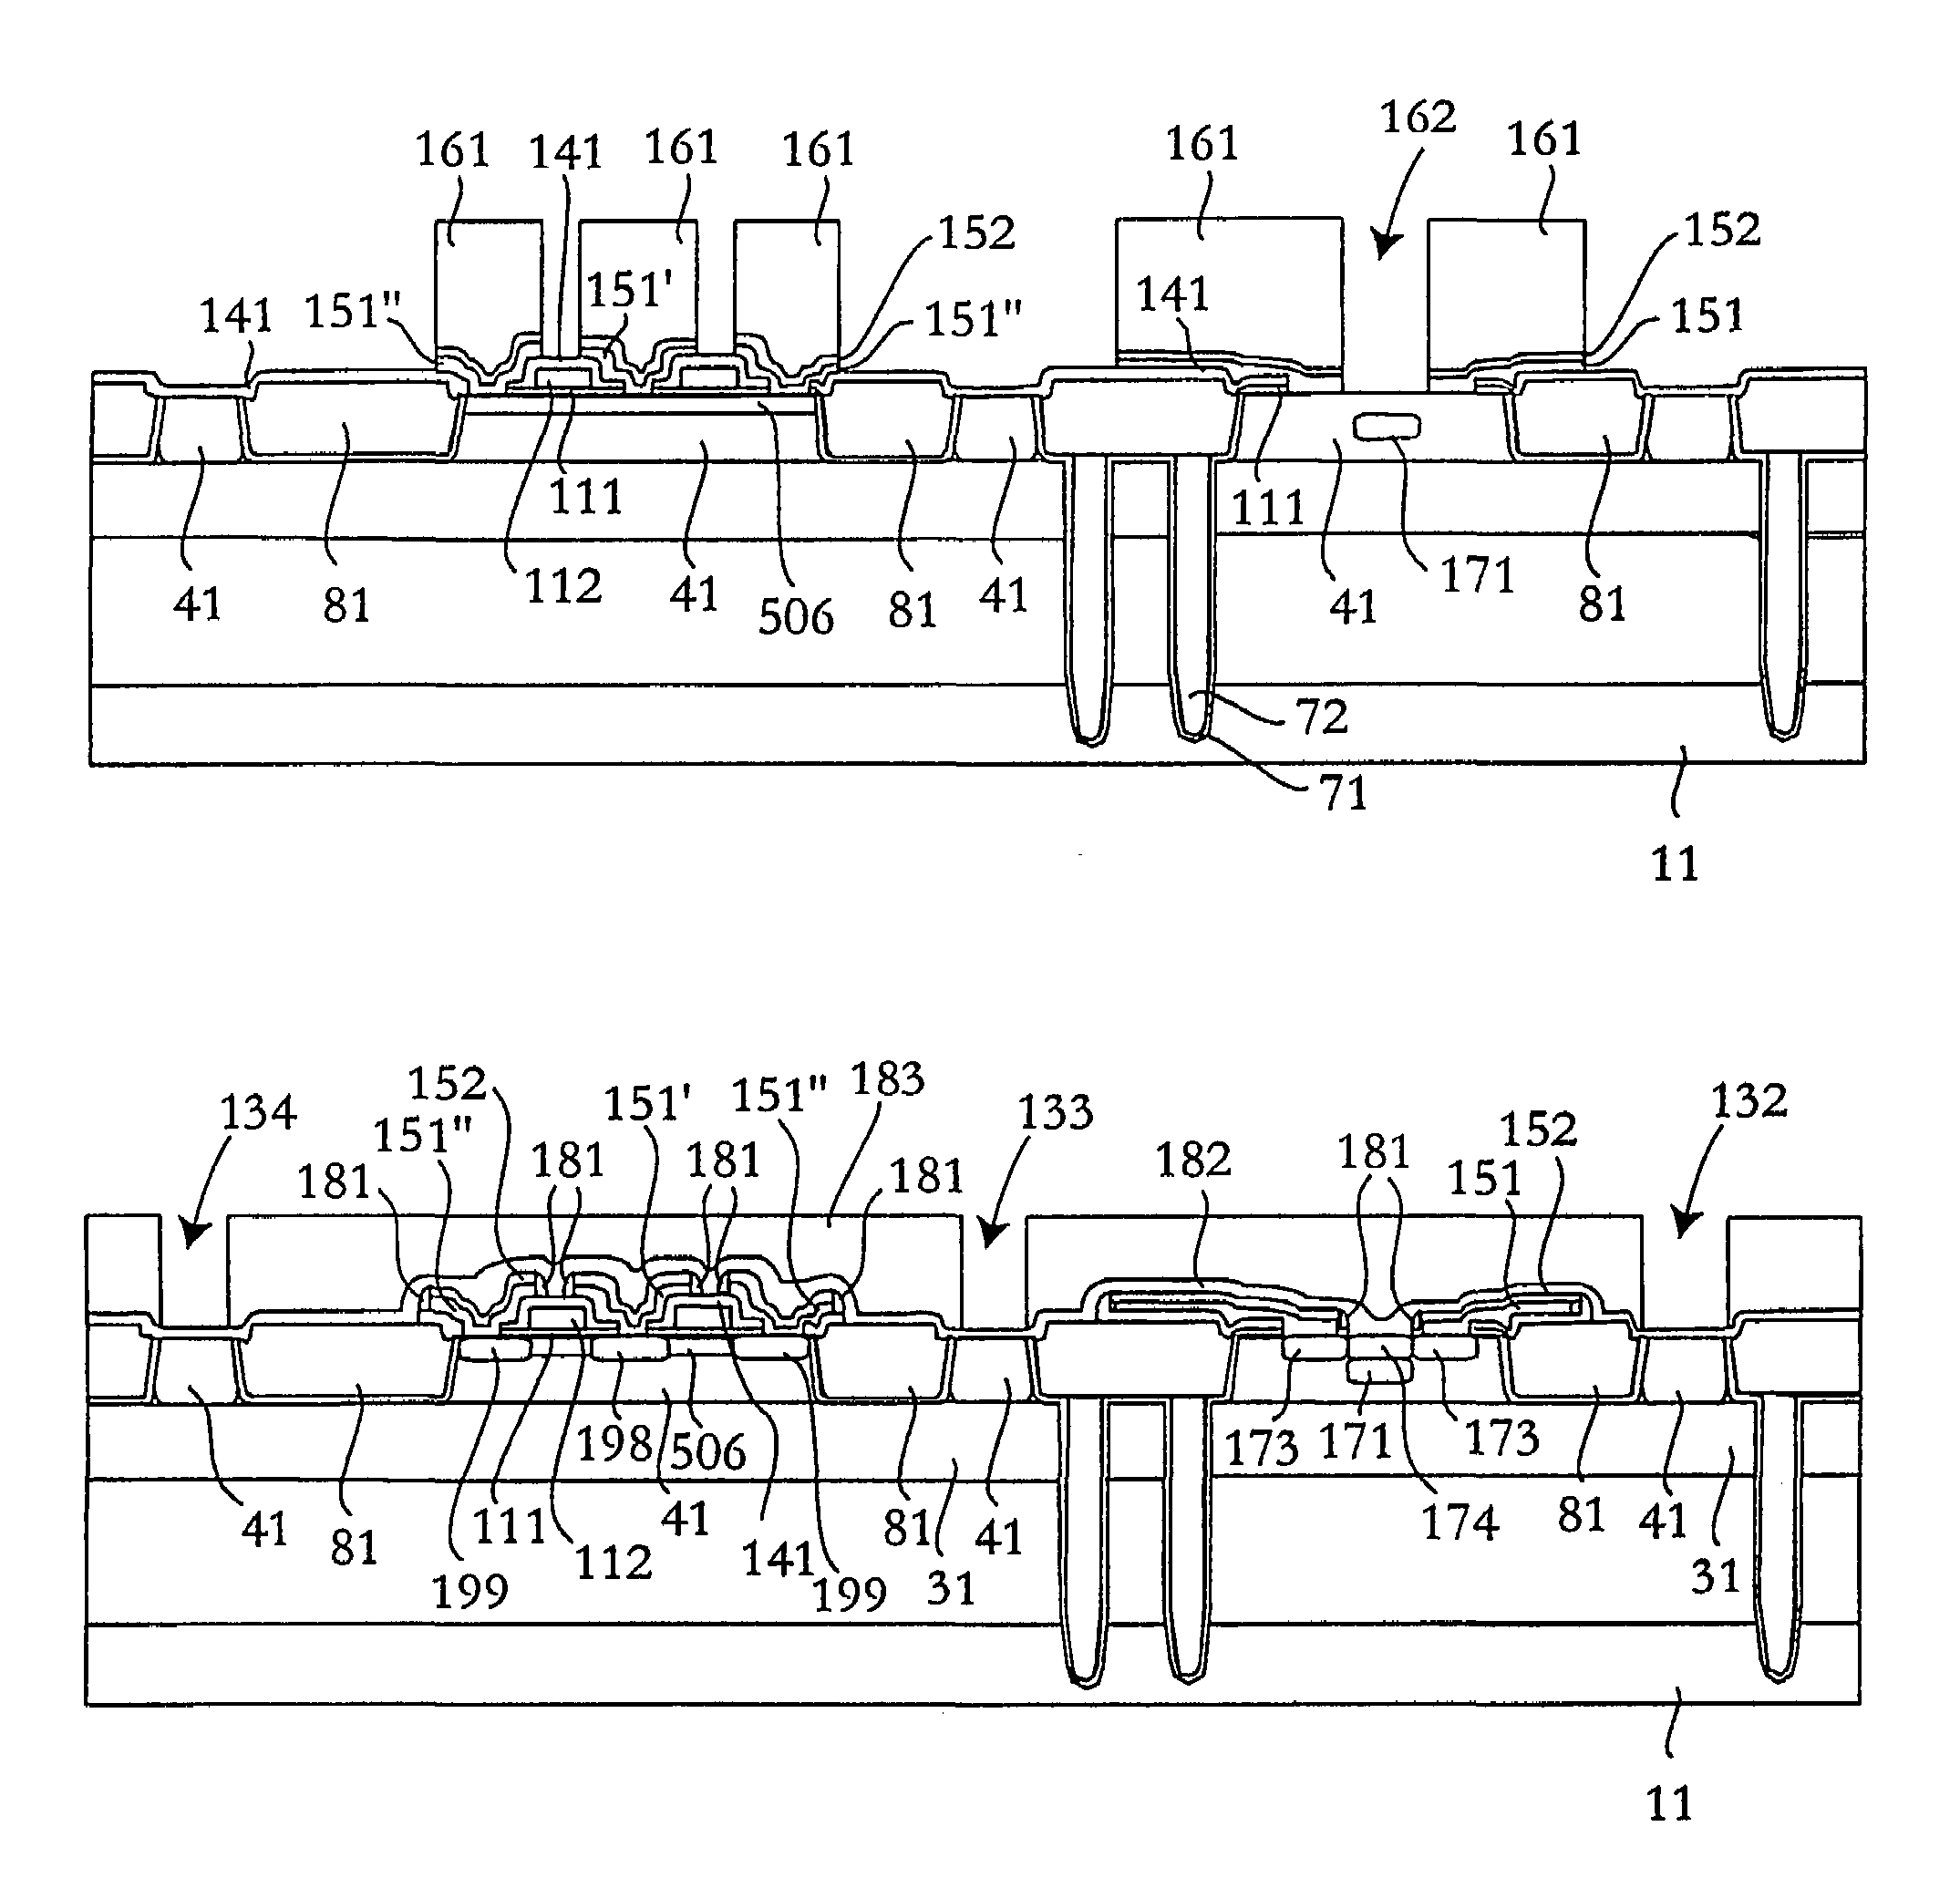 Semiconductor fabrication process, lateral PNP transistor, and integrated circuit